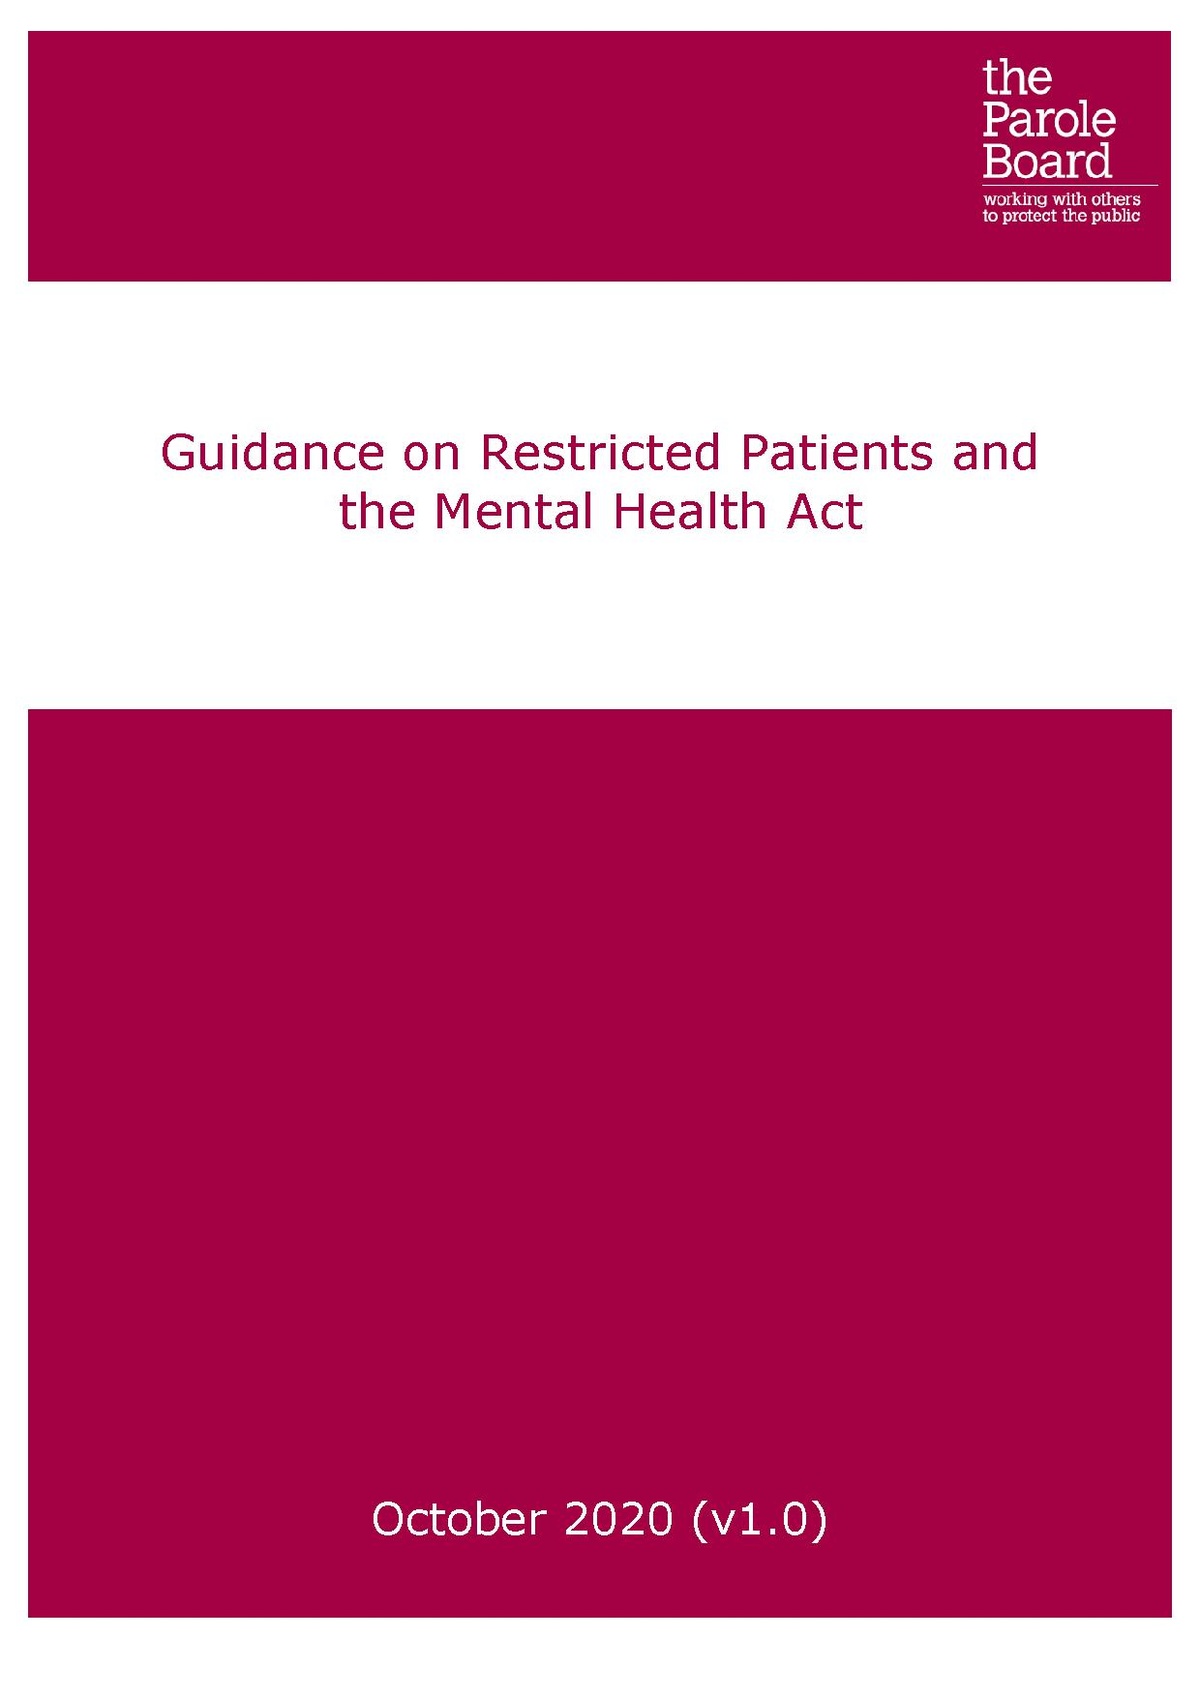 File2020 10 Parole Board Guidance On Restricted Patients And Mhapdf Mental Health Law Online 3390